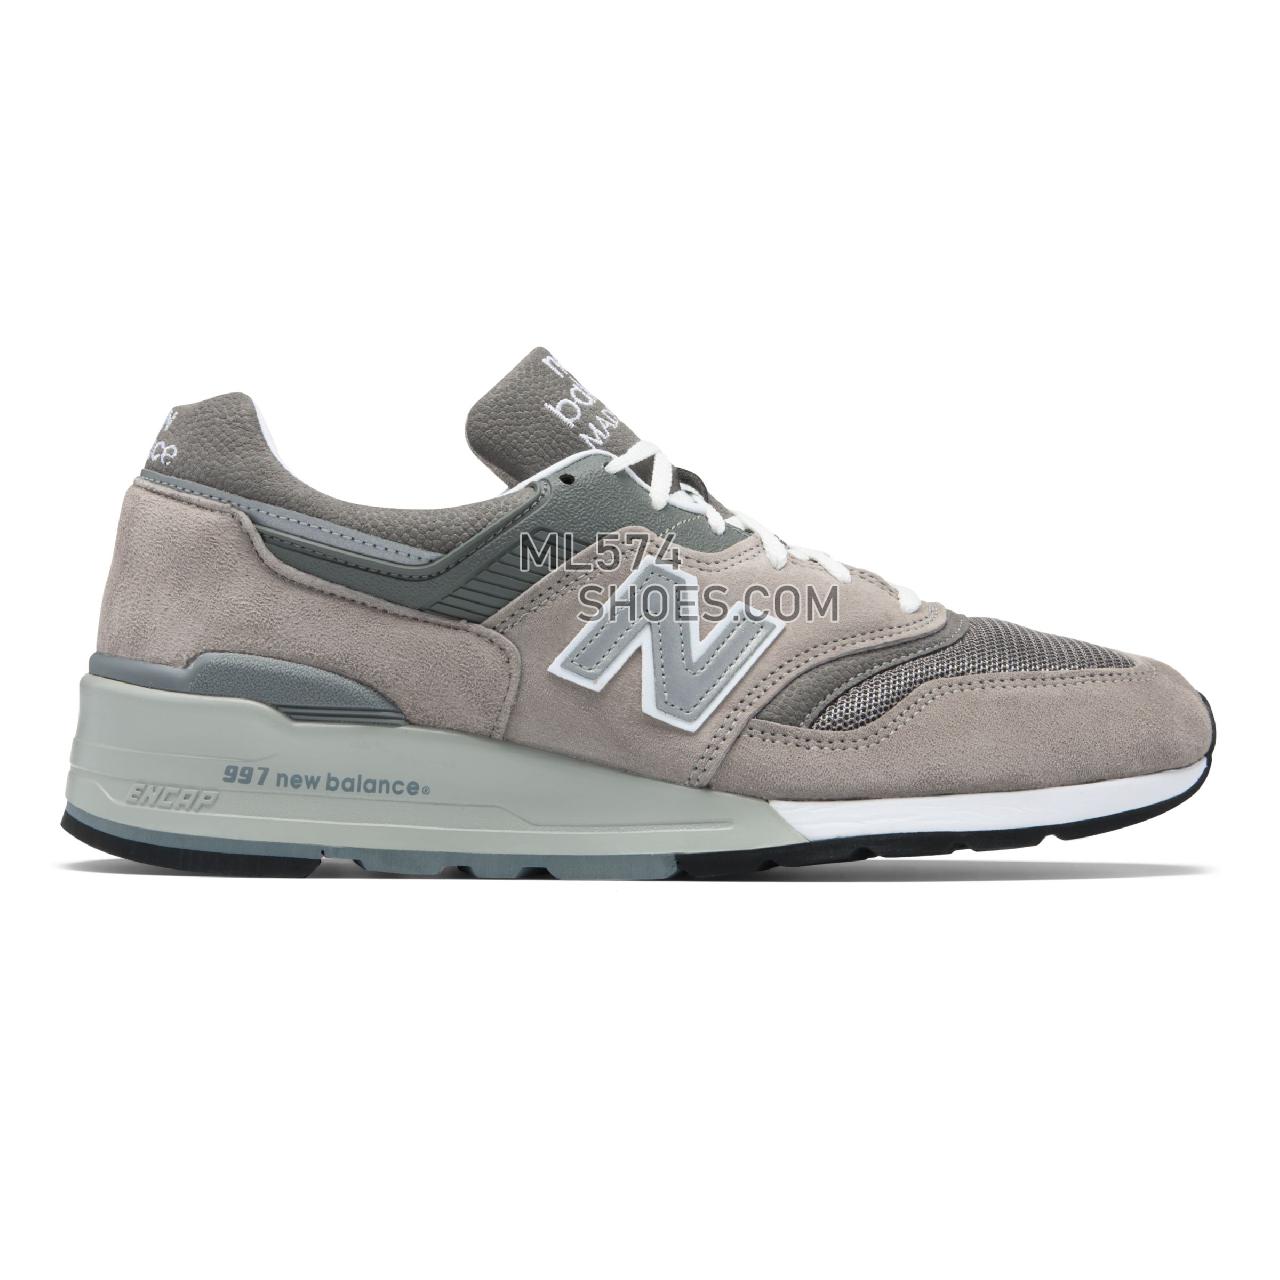 New Balance 997 Made in US - Men's Made in USA And UK Sneakers - Grey with White - M997GY